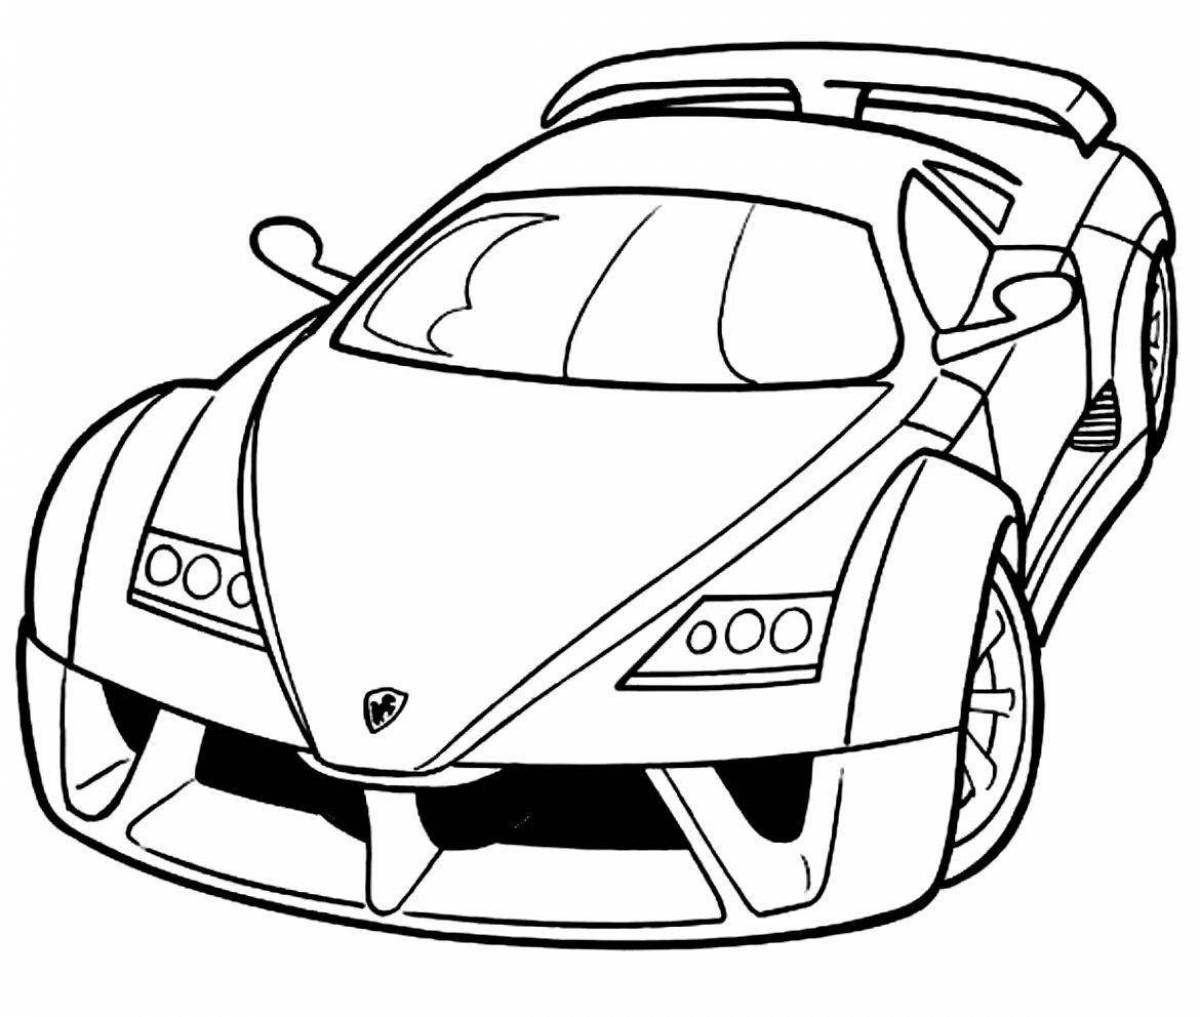 Exciting coloring pages of ferrari cars